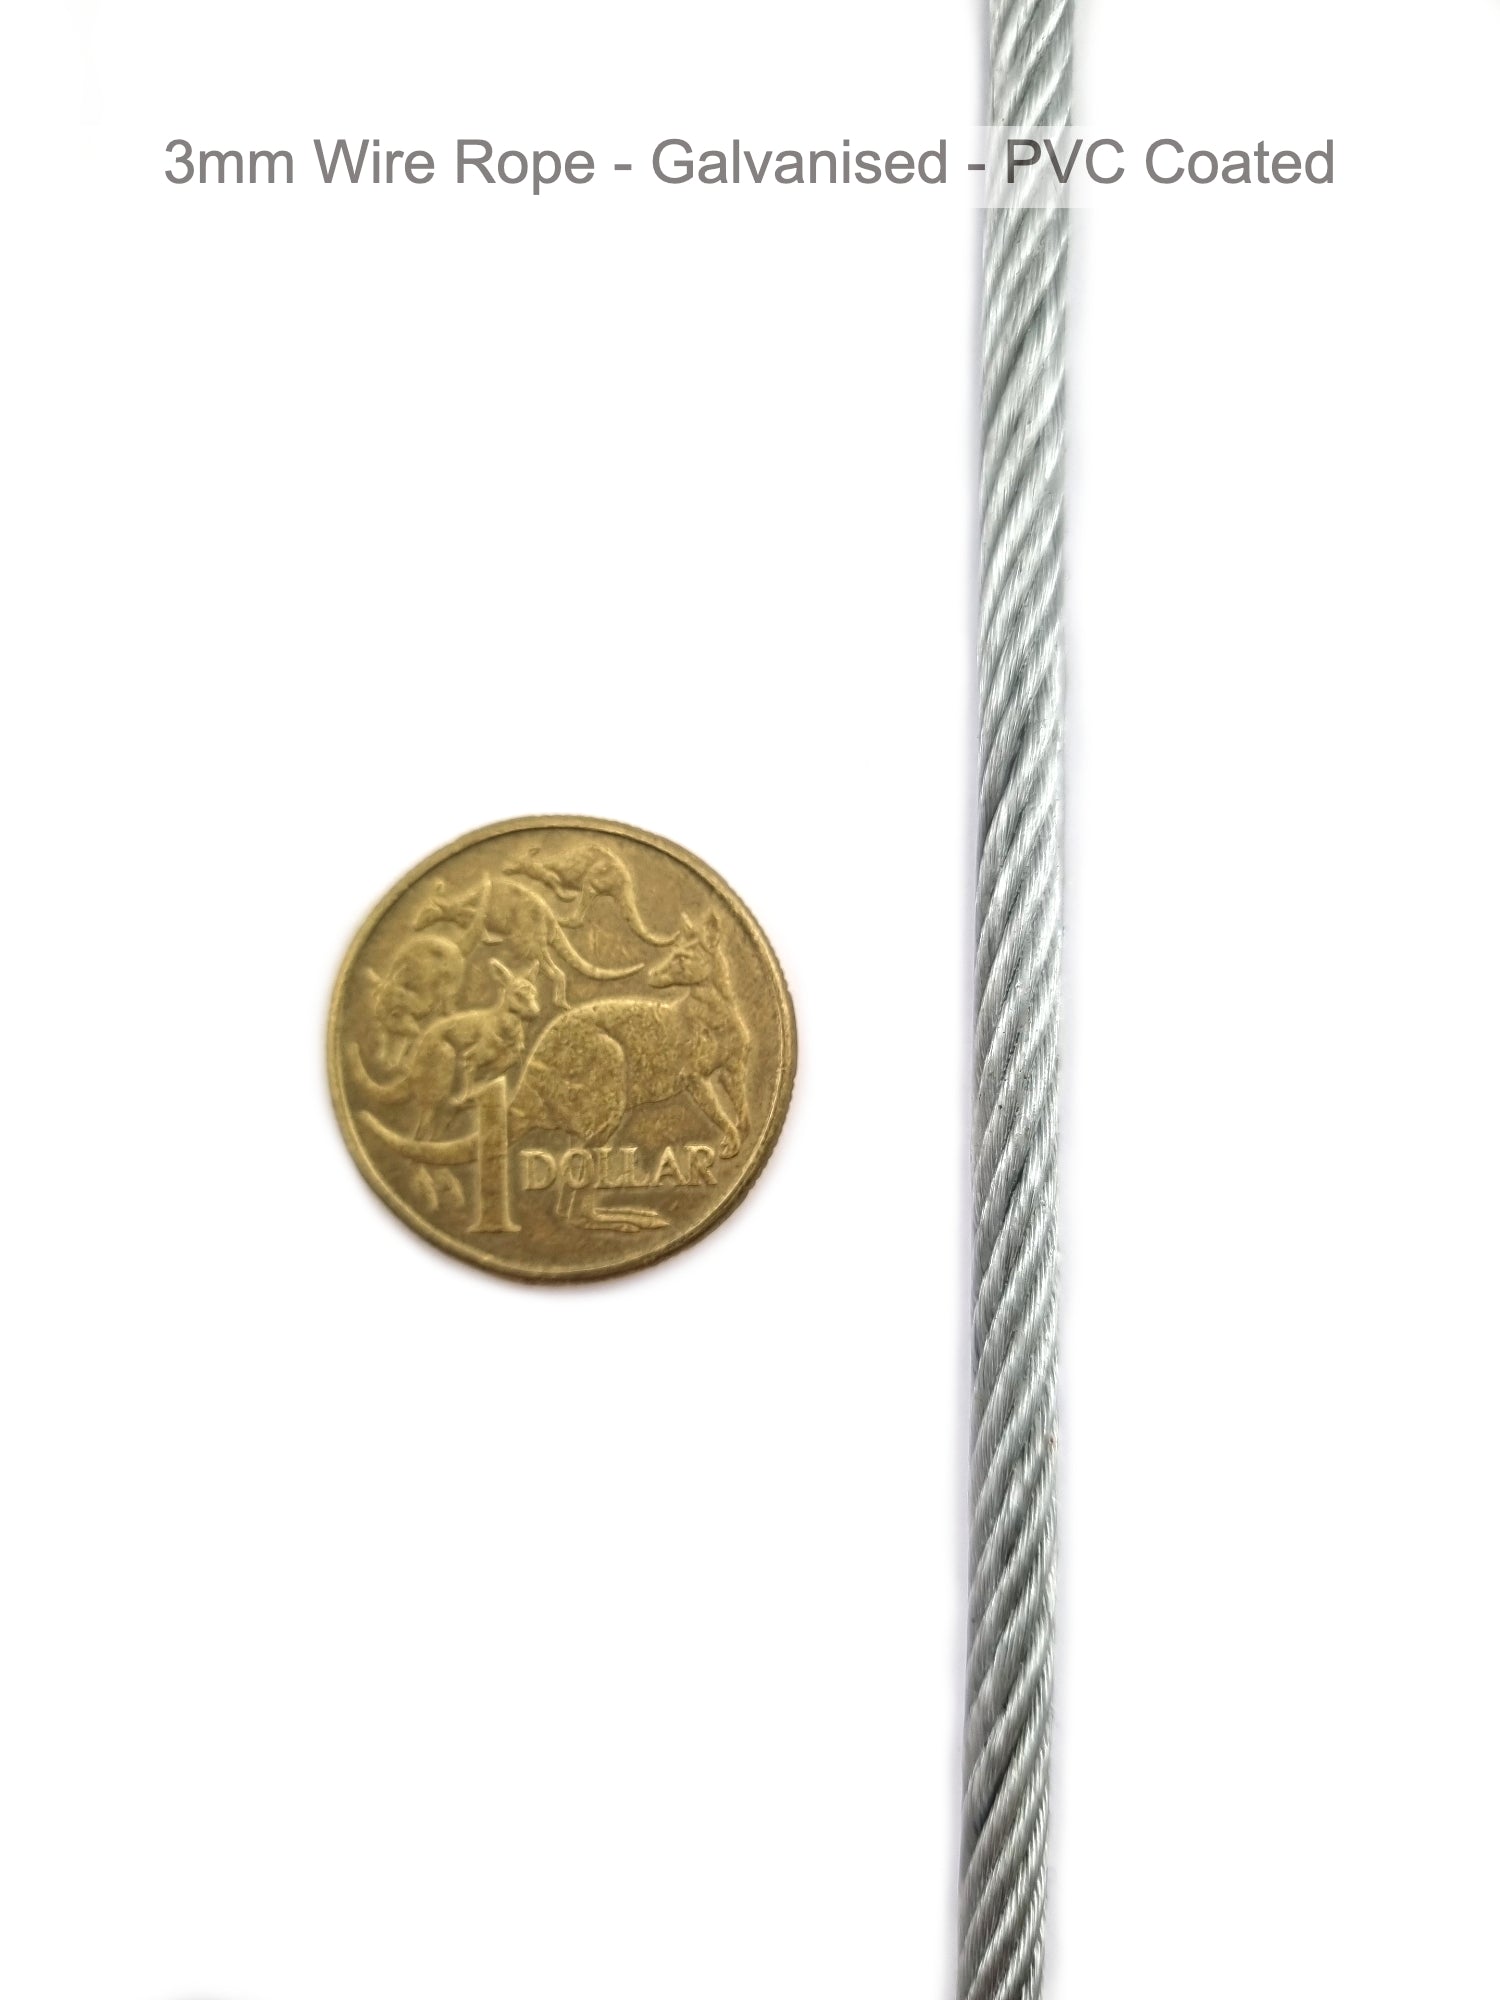 3mm PVC coated galvanised wire rope (wire cord / wire cable). Shop online chain.com.au. Australia wide shipping.